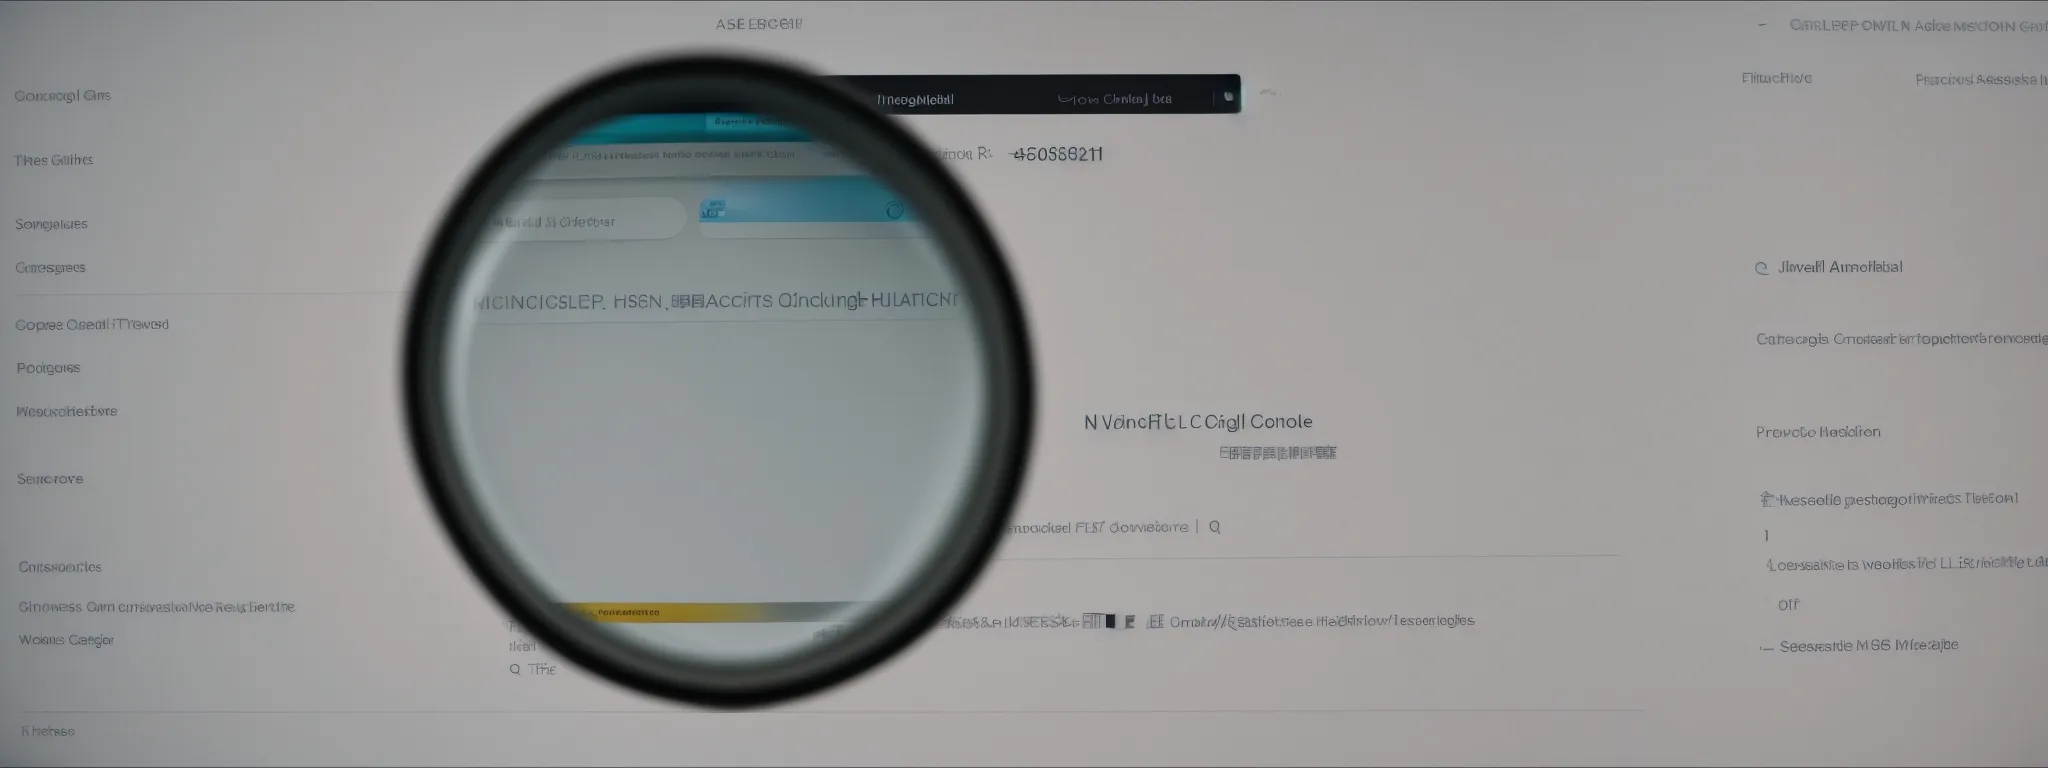 a magnifying glass hovering over a computer screen displaying a search engine's results page.